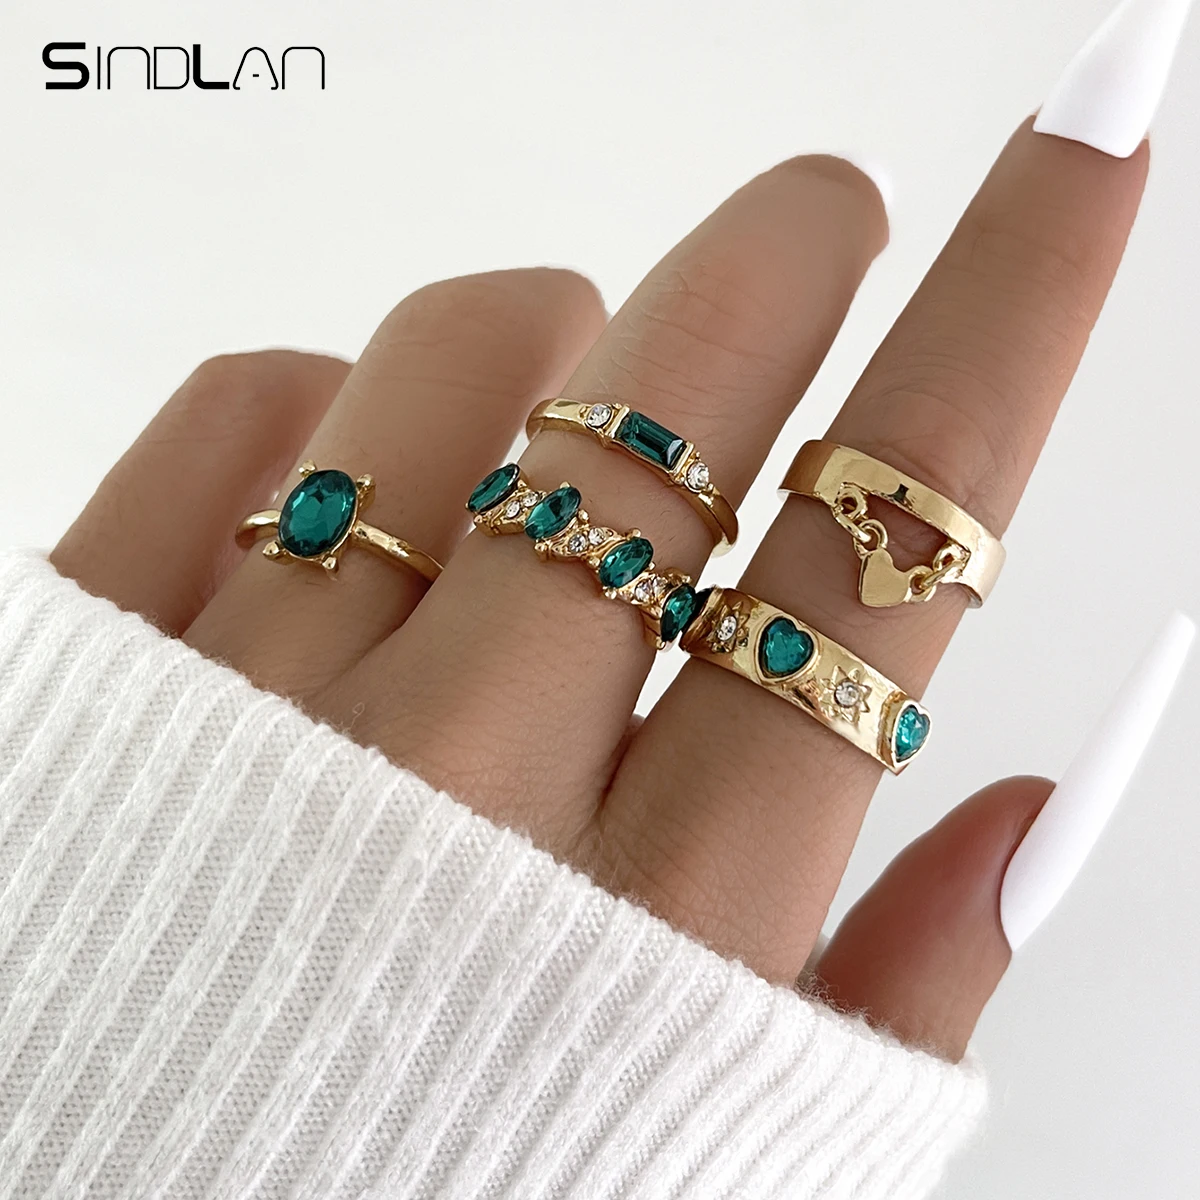 

Sindlan 5Pcs Vintage Gold Color Heart Rings for Women Kpop Green Crystal Geometric Set Female Fashion Jewelry Gift Anillos Mujer